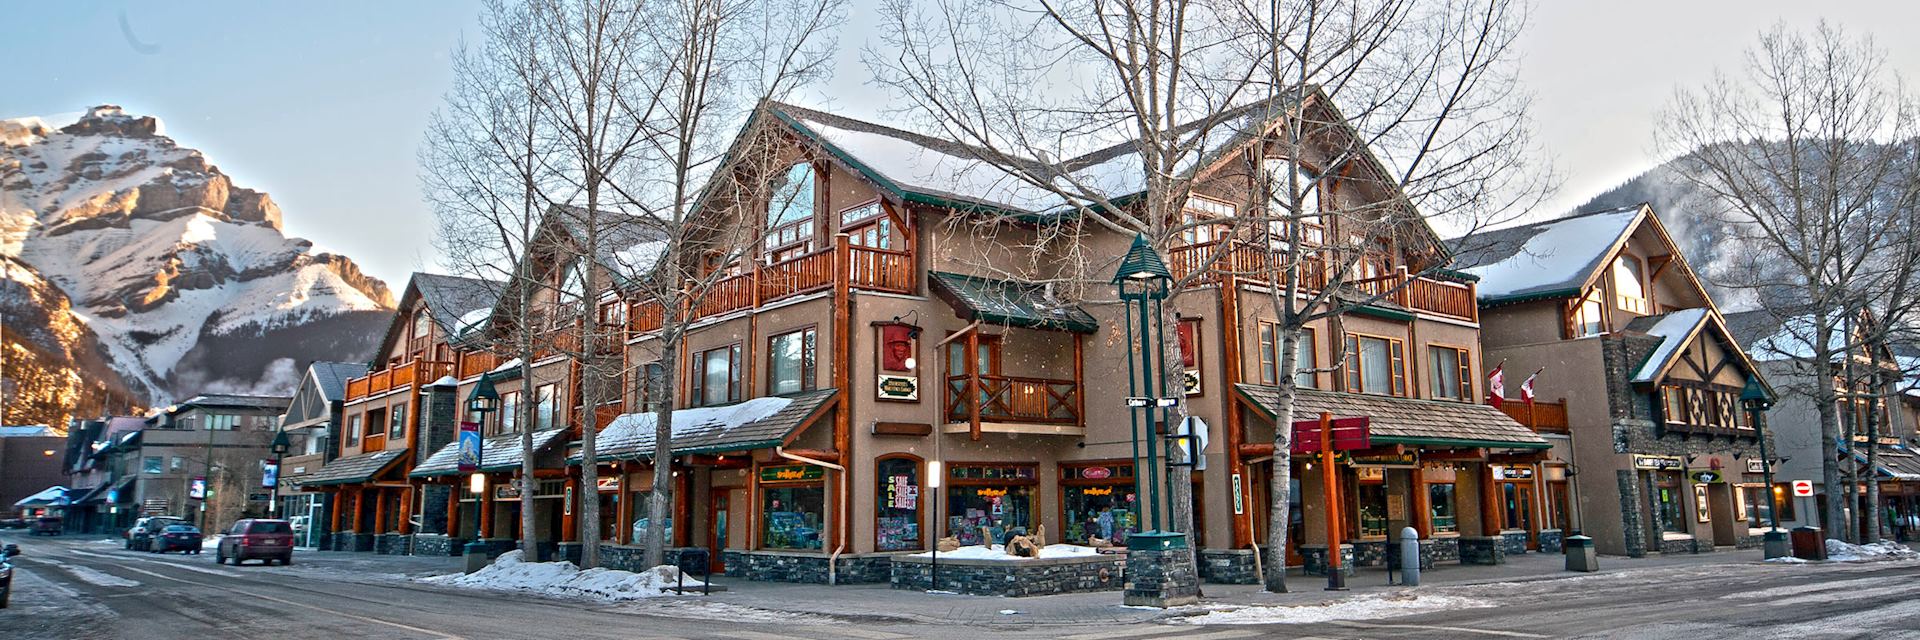 Brewster's Mountain Lodge